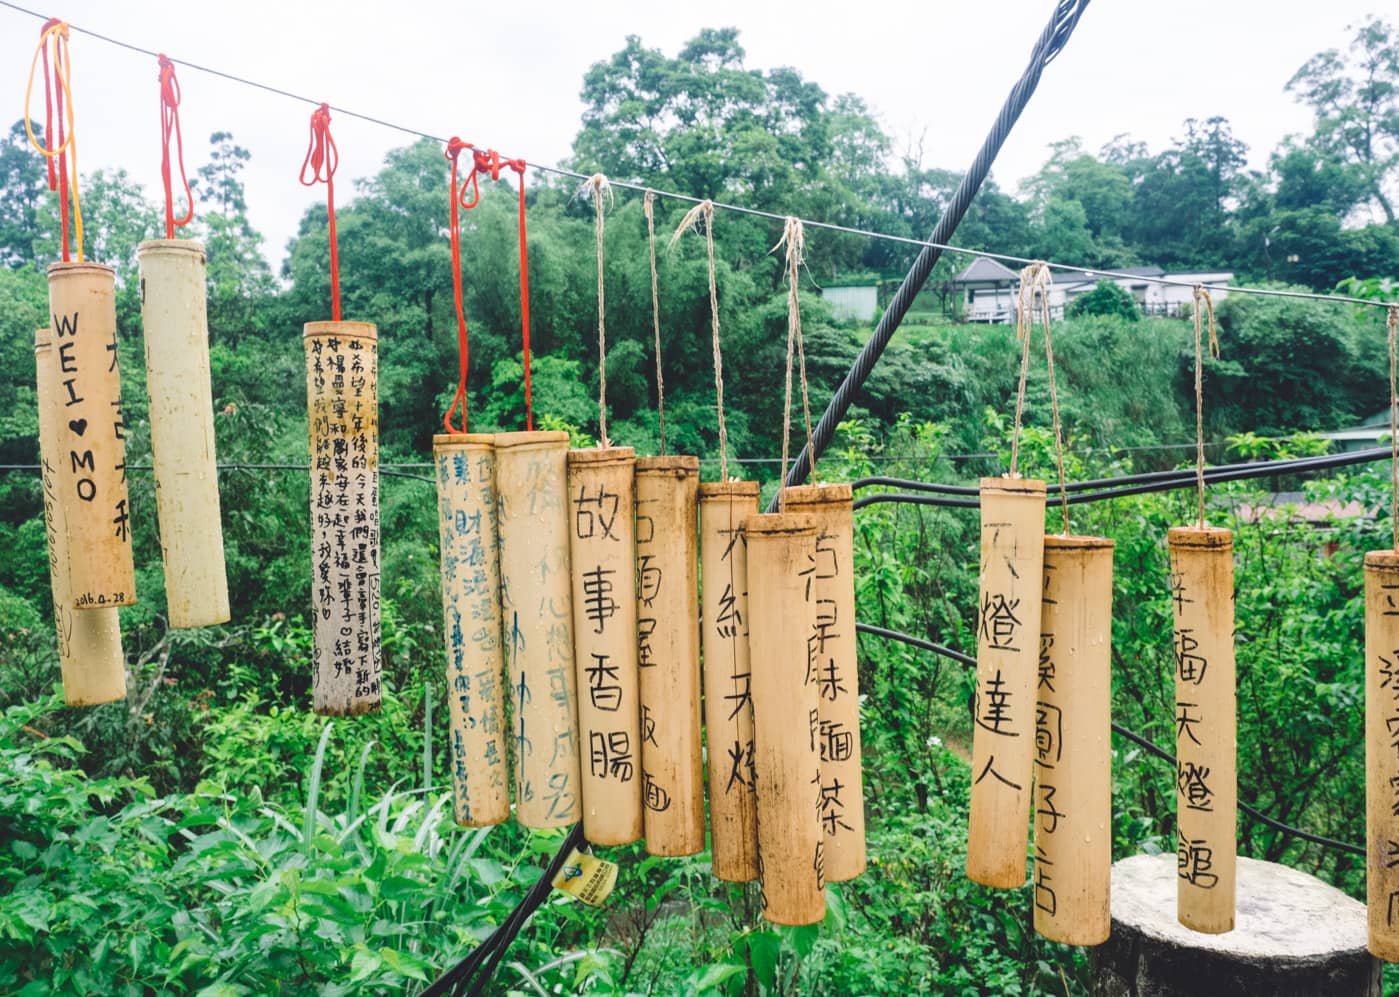 Taiwan - Shifen - Wooden well wishes